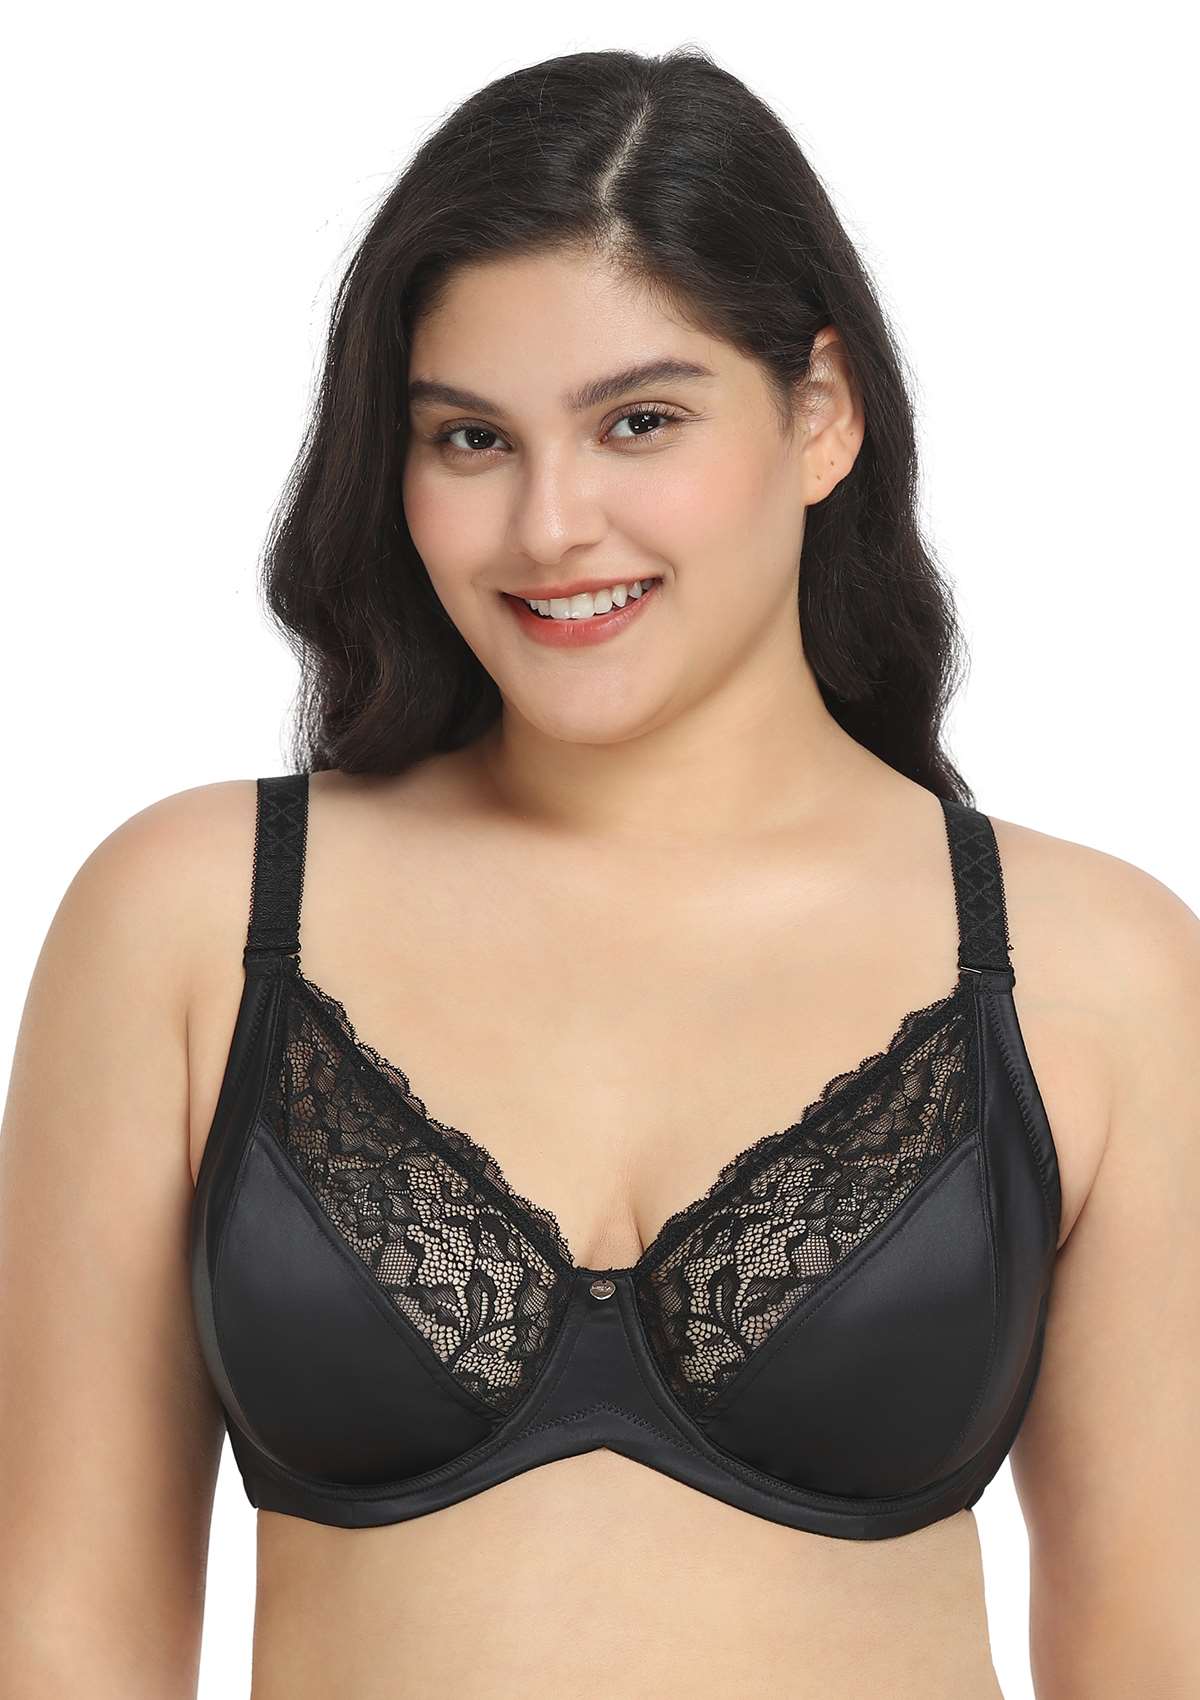 HSIA Foxy Satin Silky Full Coverage Underwire Bra With Floral Lace Trim - Black / 44 / D